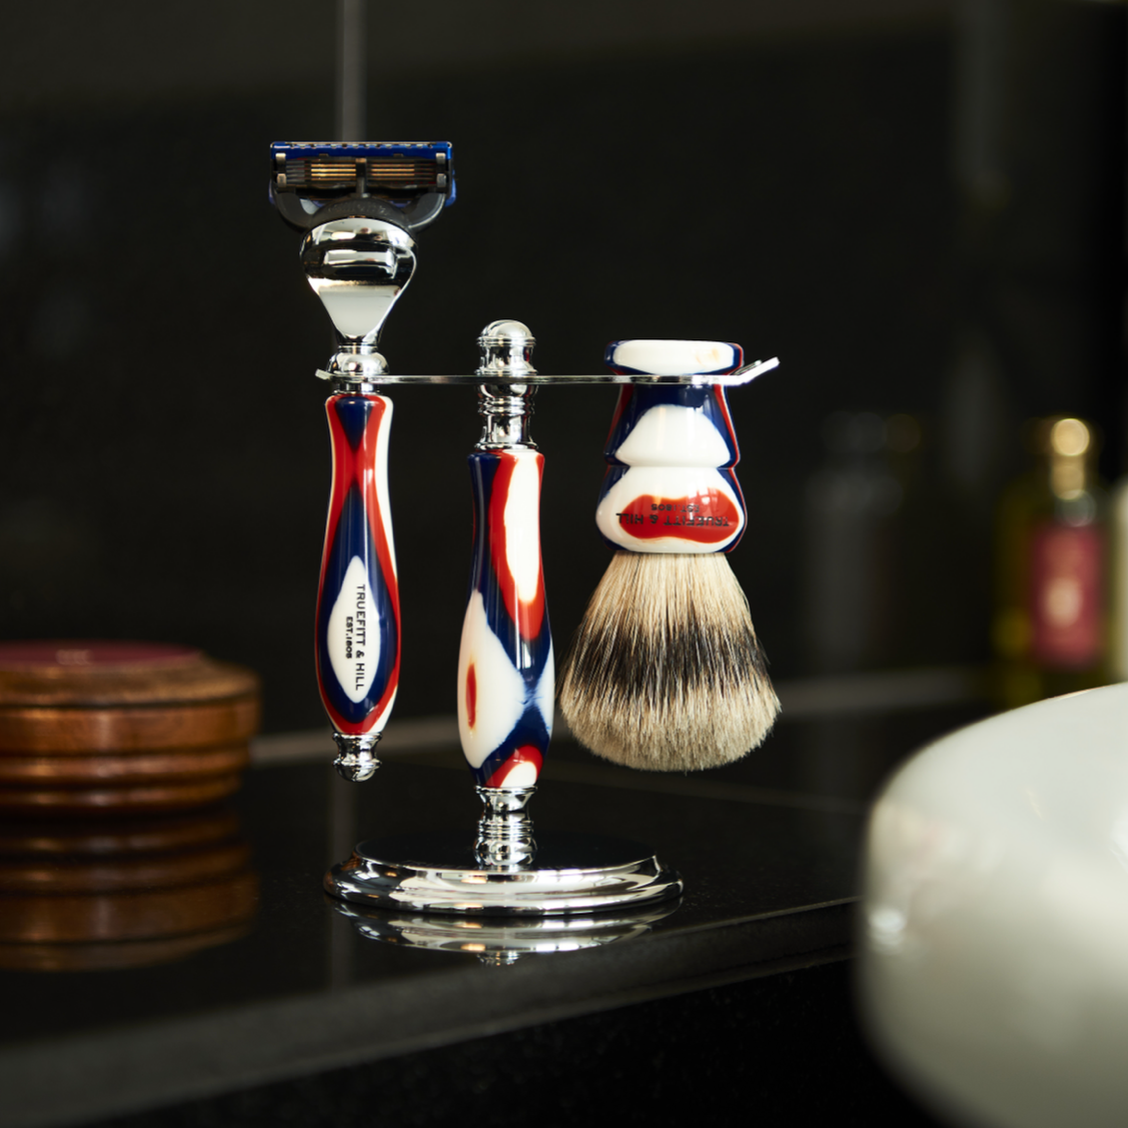 Truefitt & Hill US, Gentlemen's Grooming and Styling Products